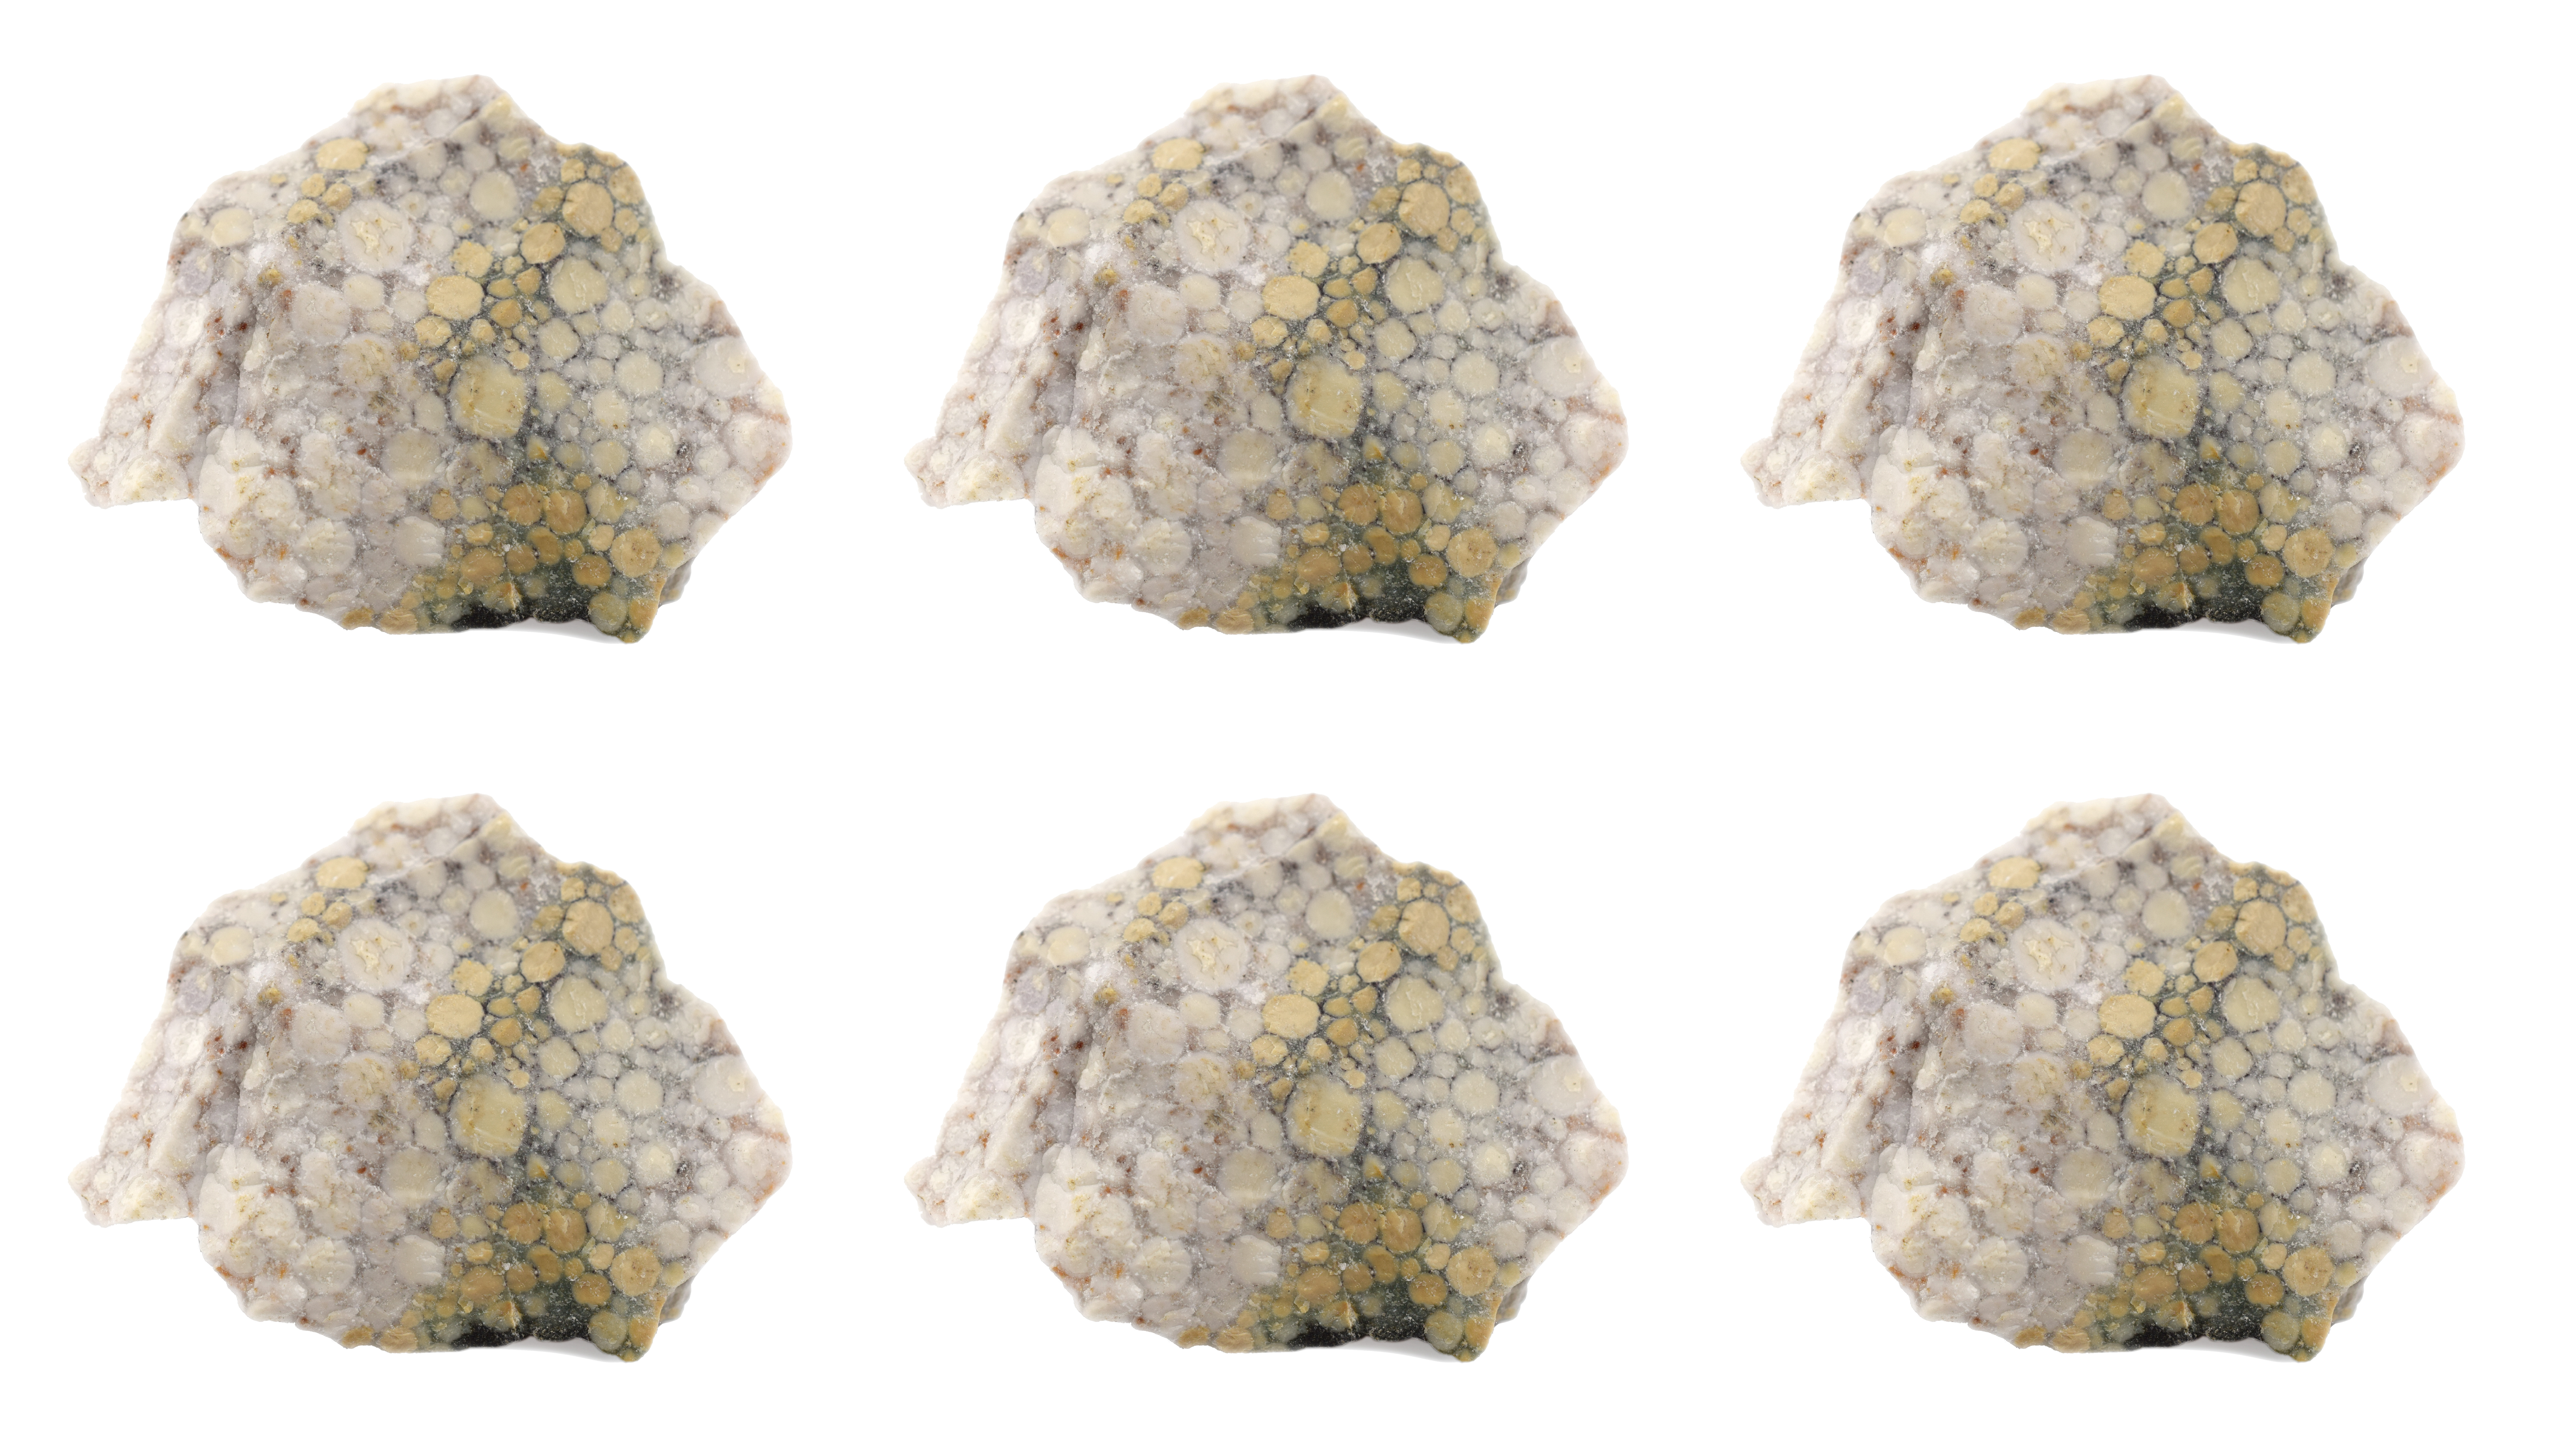 6PK Raw Conglomerate Rock Specimens, 1